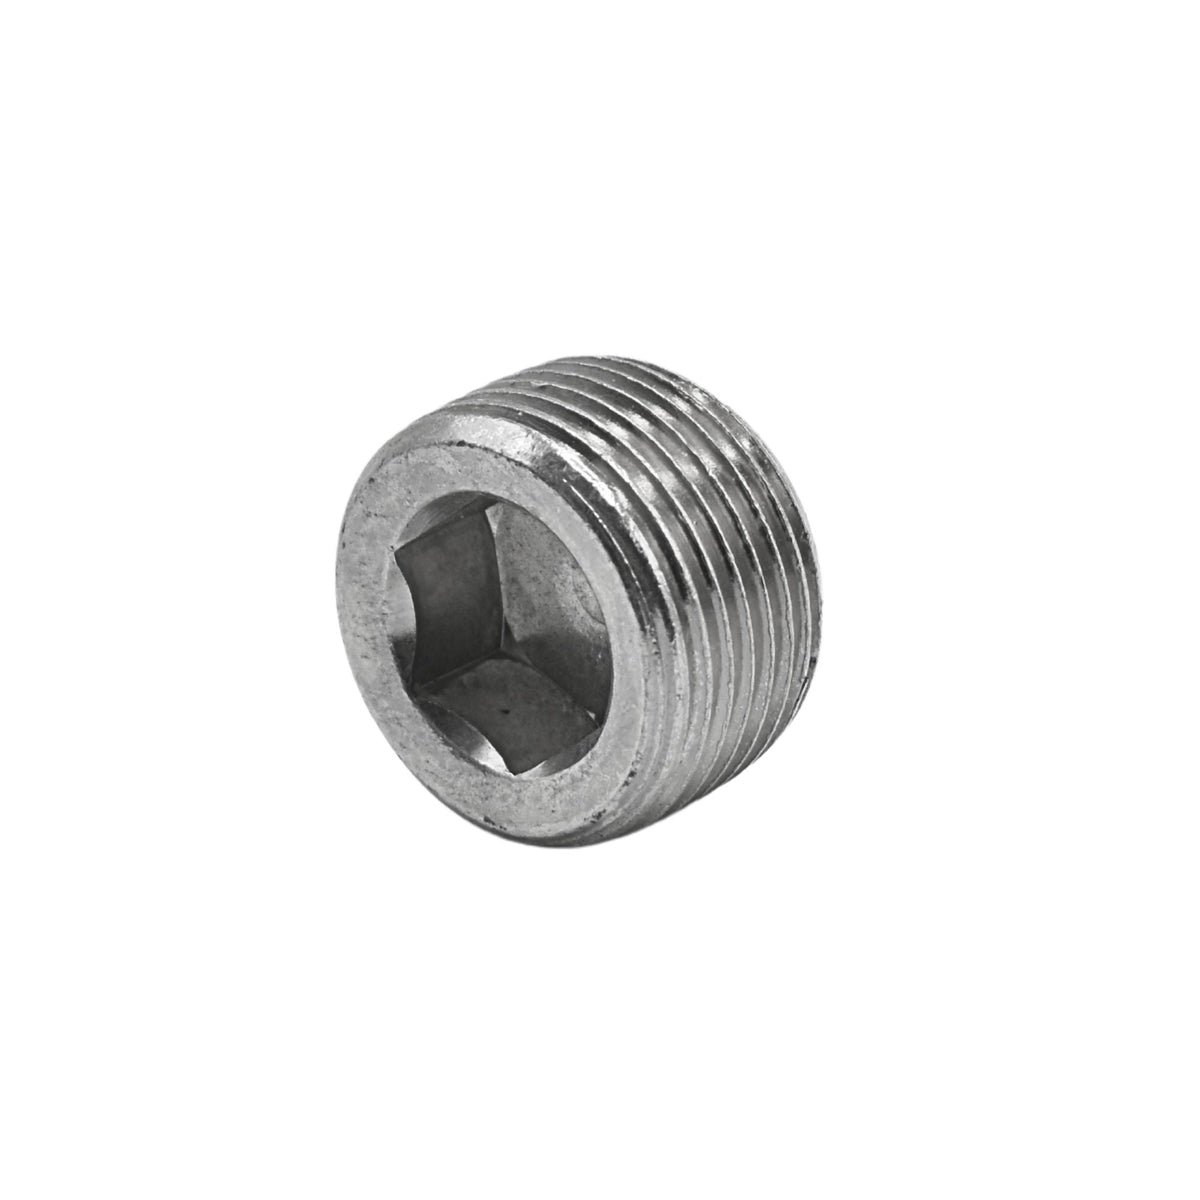 Hydraulics | 12 Hollow Hex Pipe Plug | 5406-HP-12